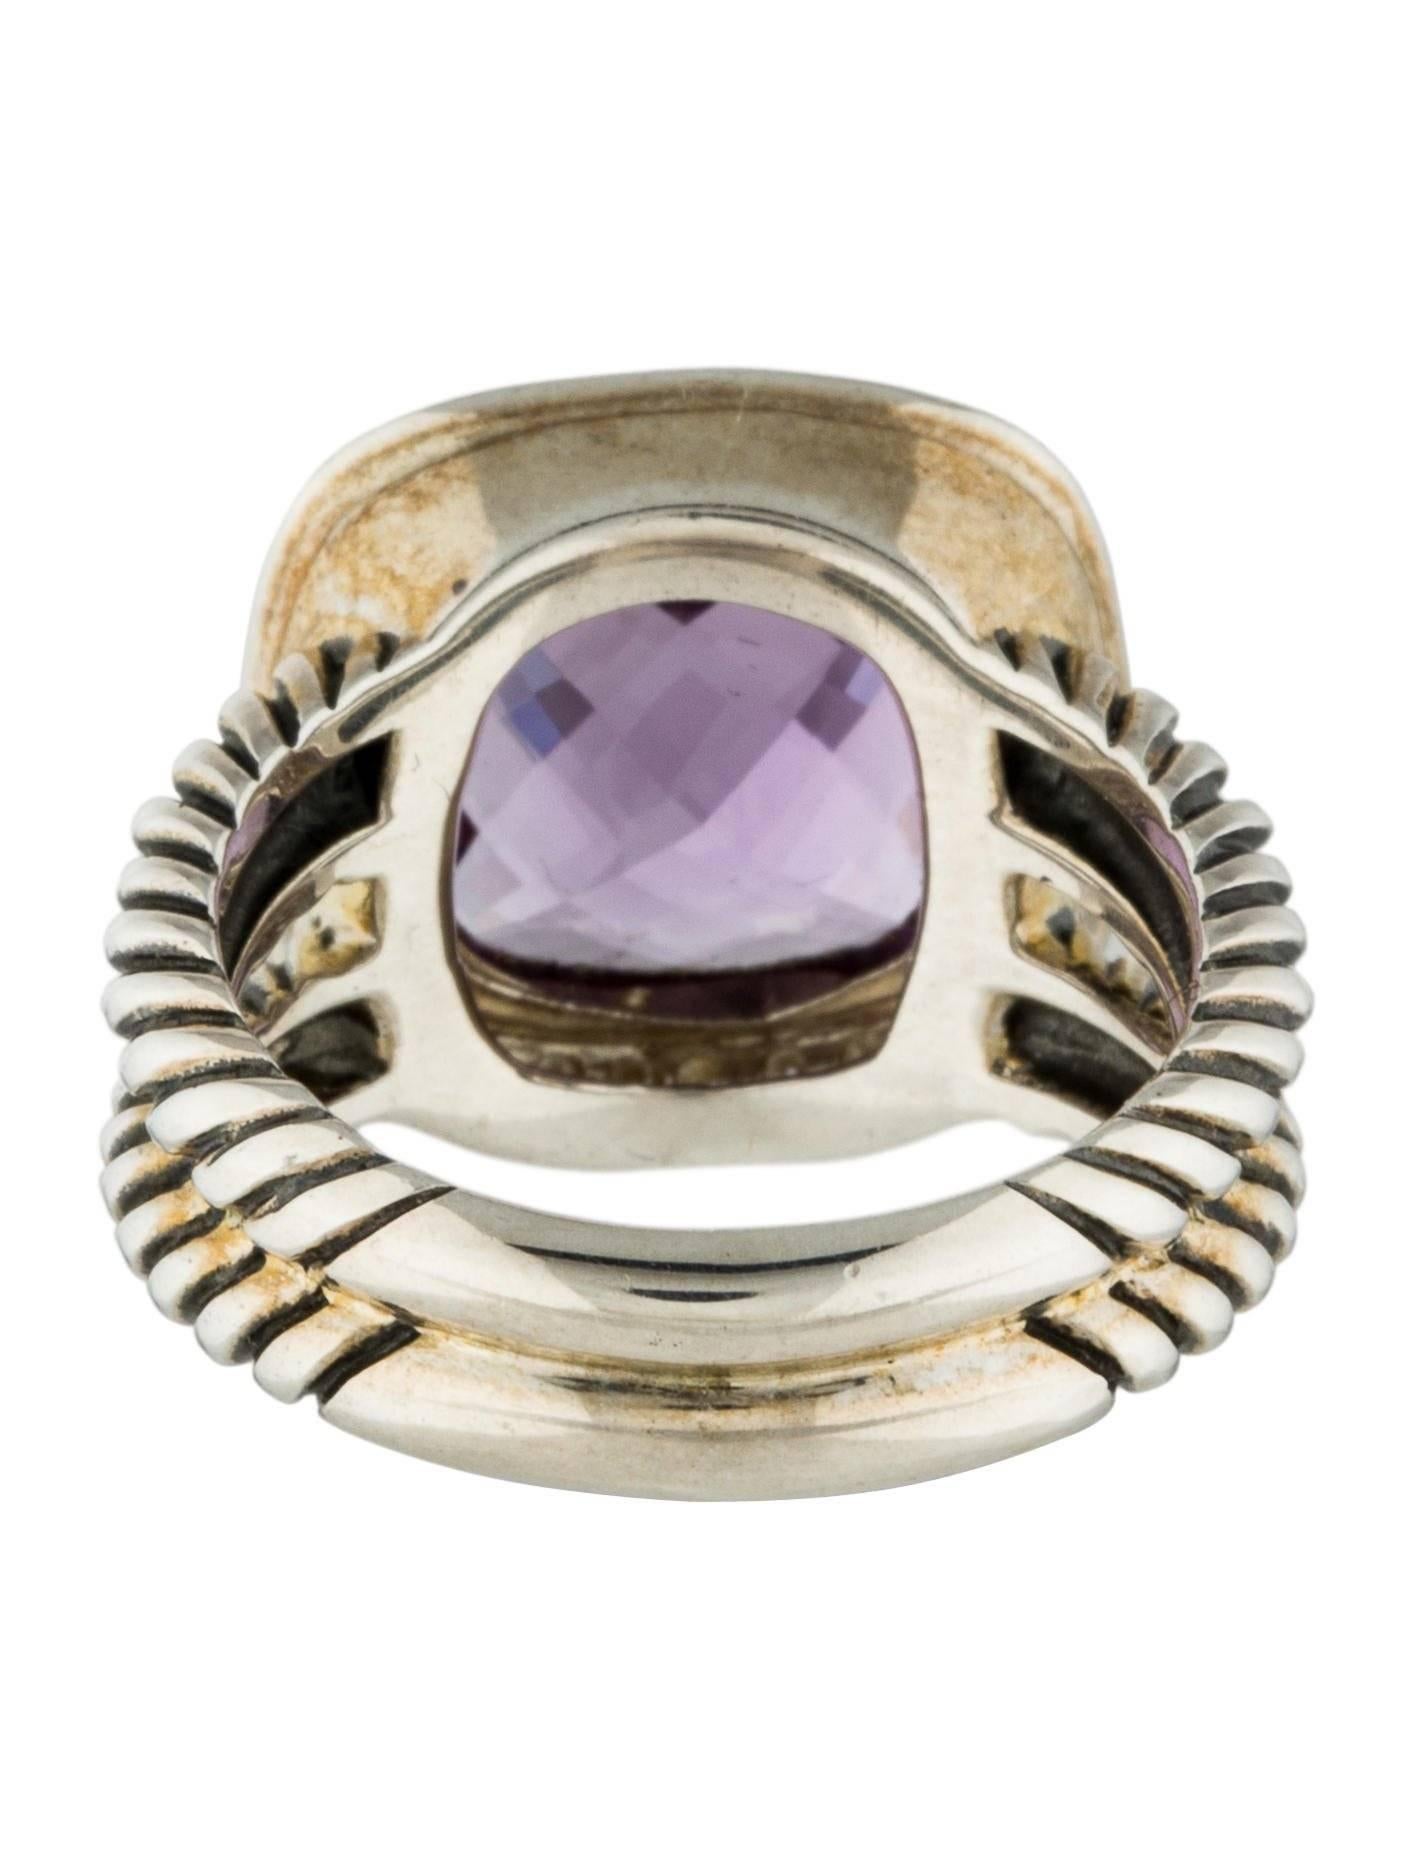 Sterling silver David Yurman Albion cocktail ring with amethyst surrounded by .22 carats of diamonds in a halo with cable textured split shank.  Band with 5mm. The ring measures .83